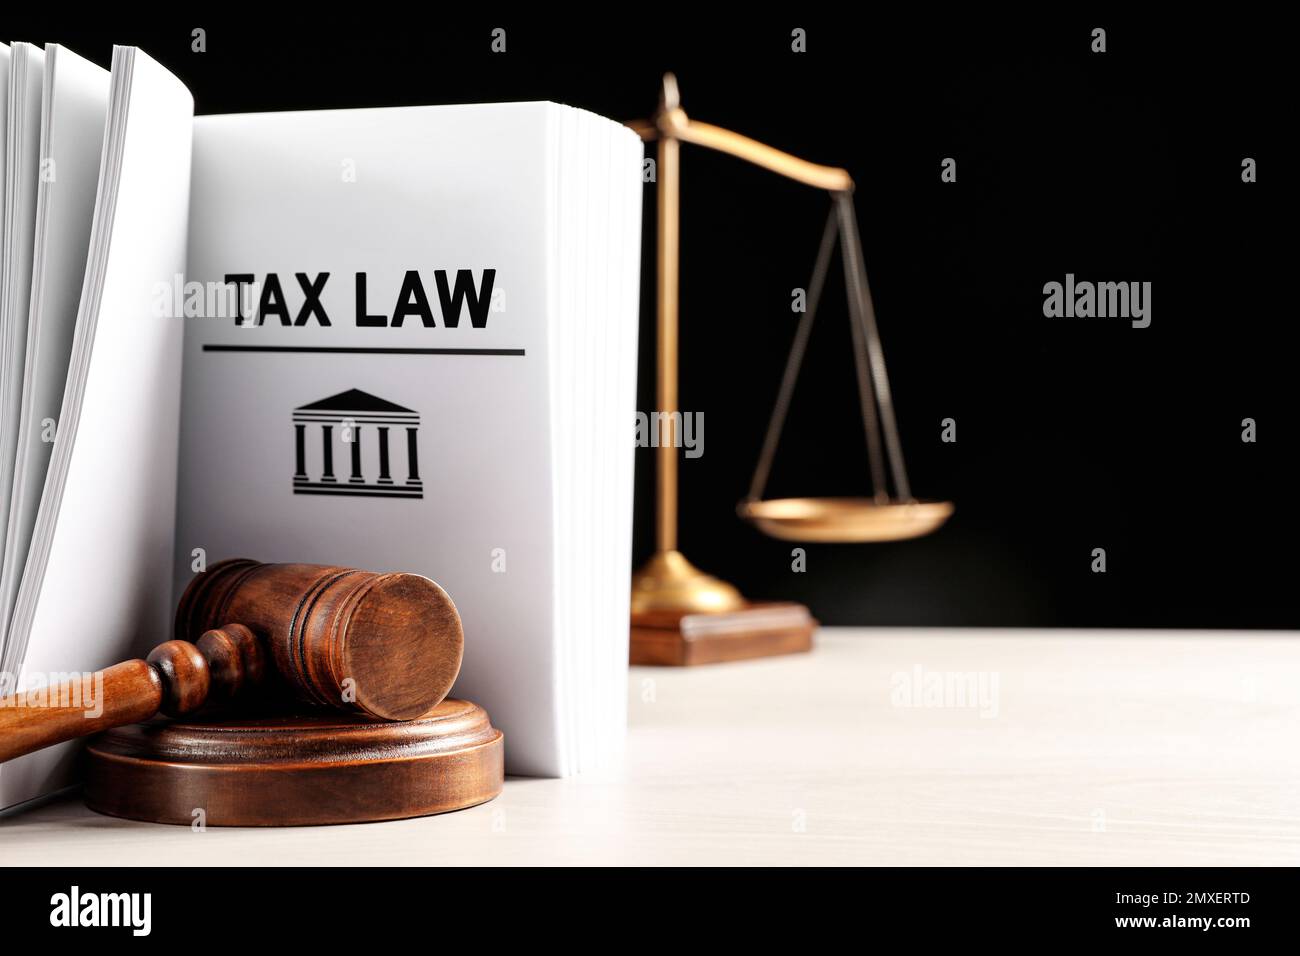 Tax law book, judge's gavel and scales on white table against black background. Space for text Stock Photo